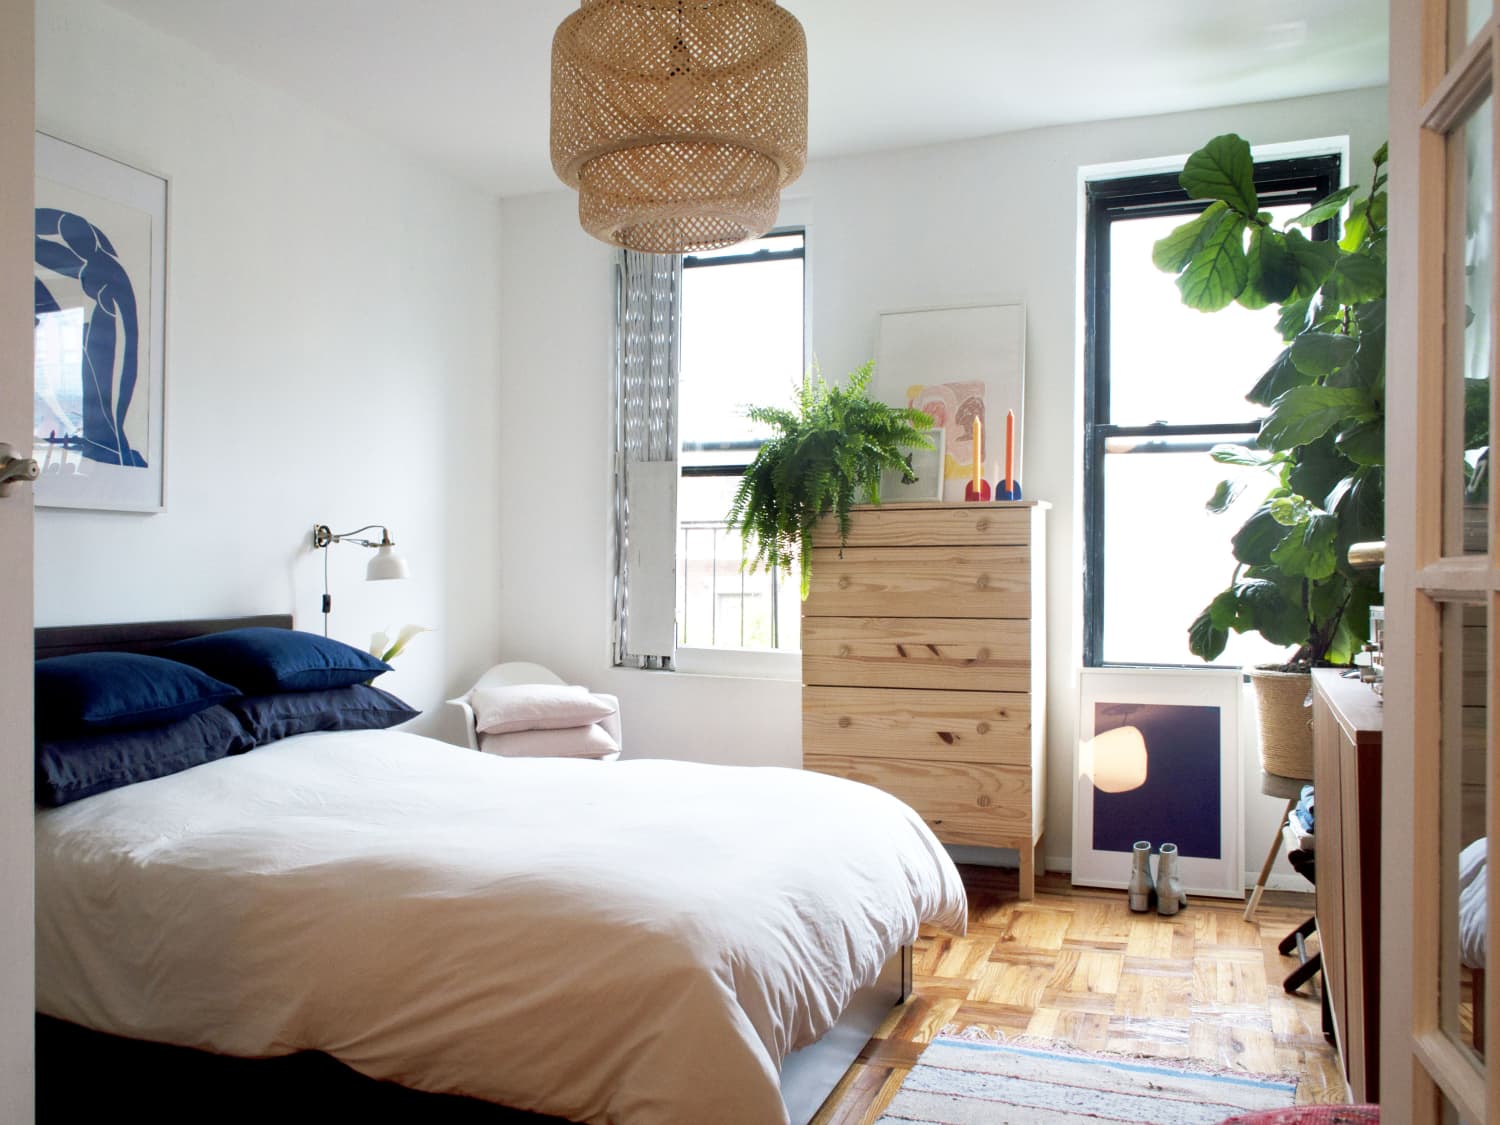 The Best Small Space Lighting From Ikea | Apartment Therapy